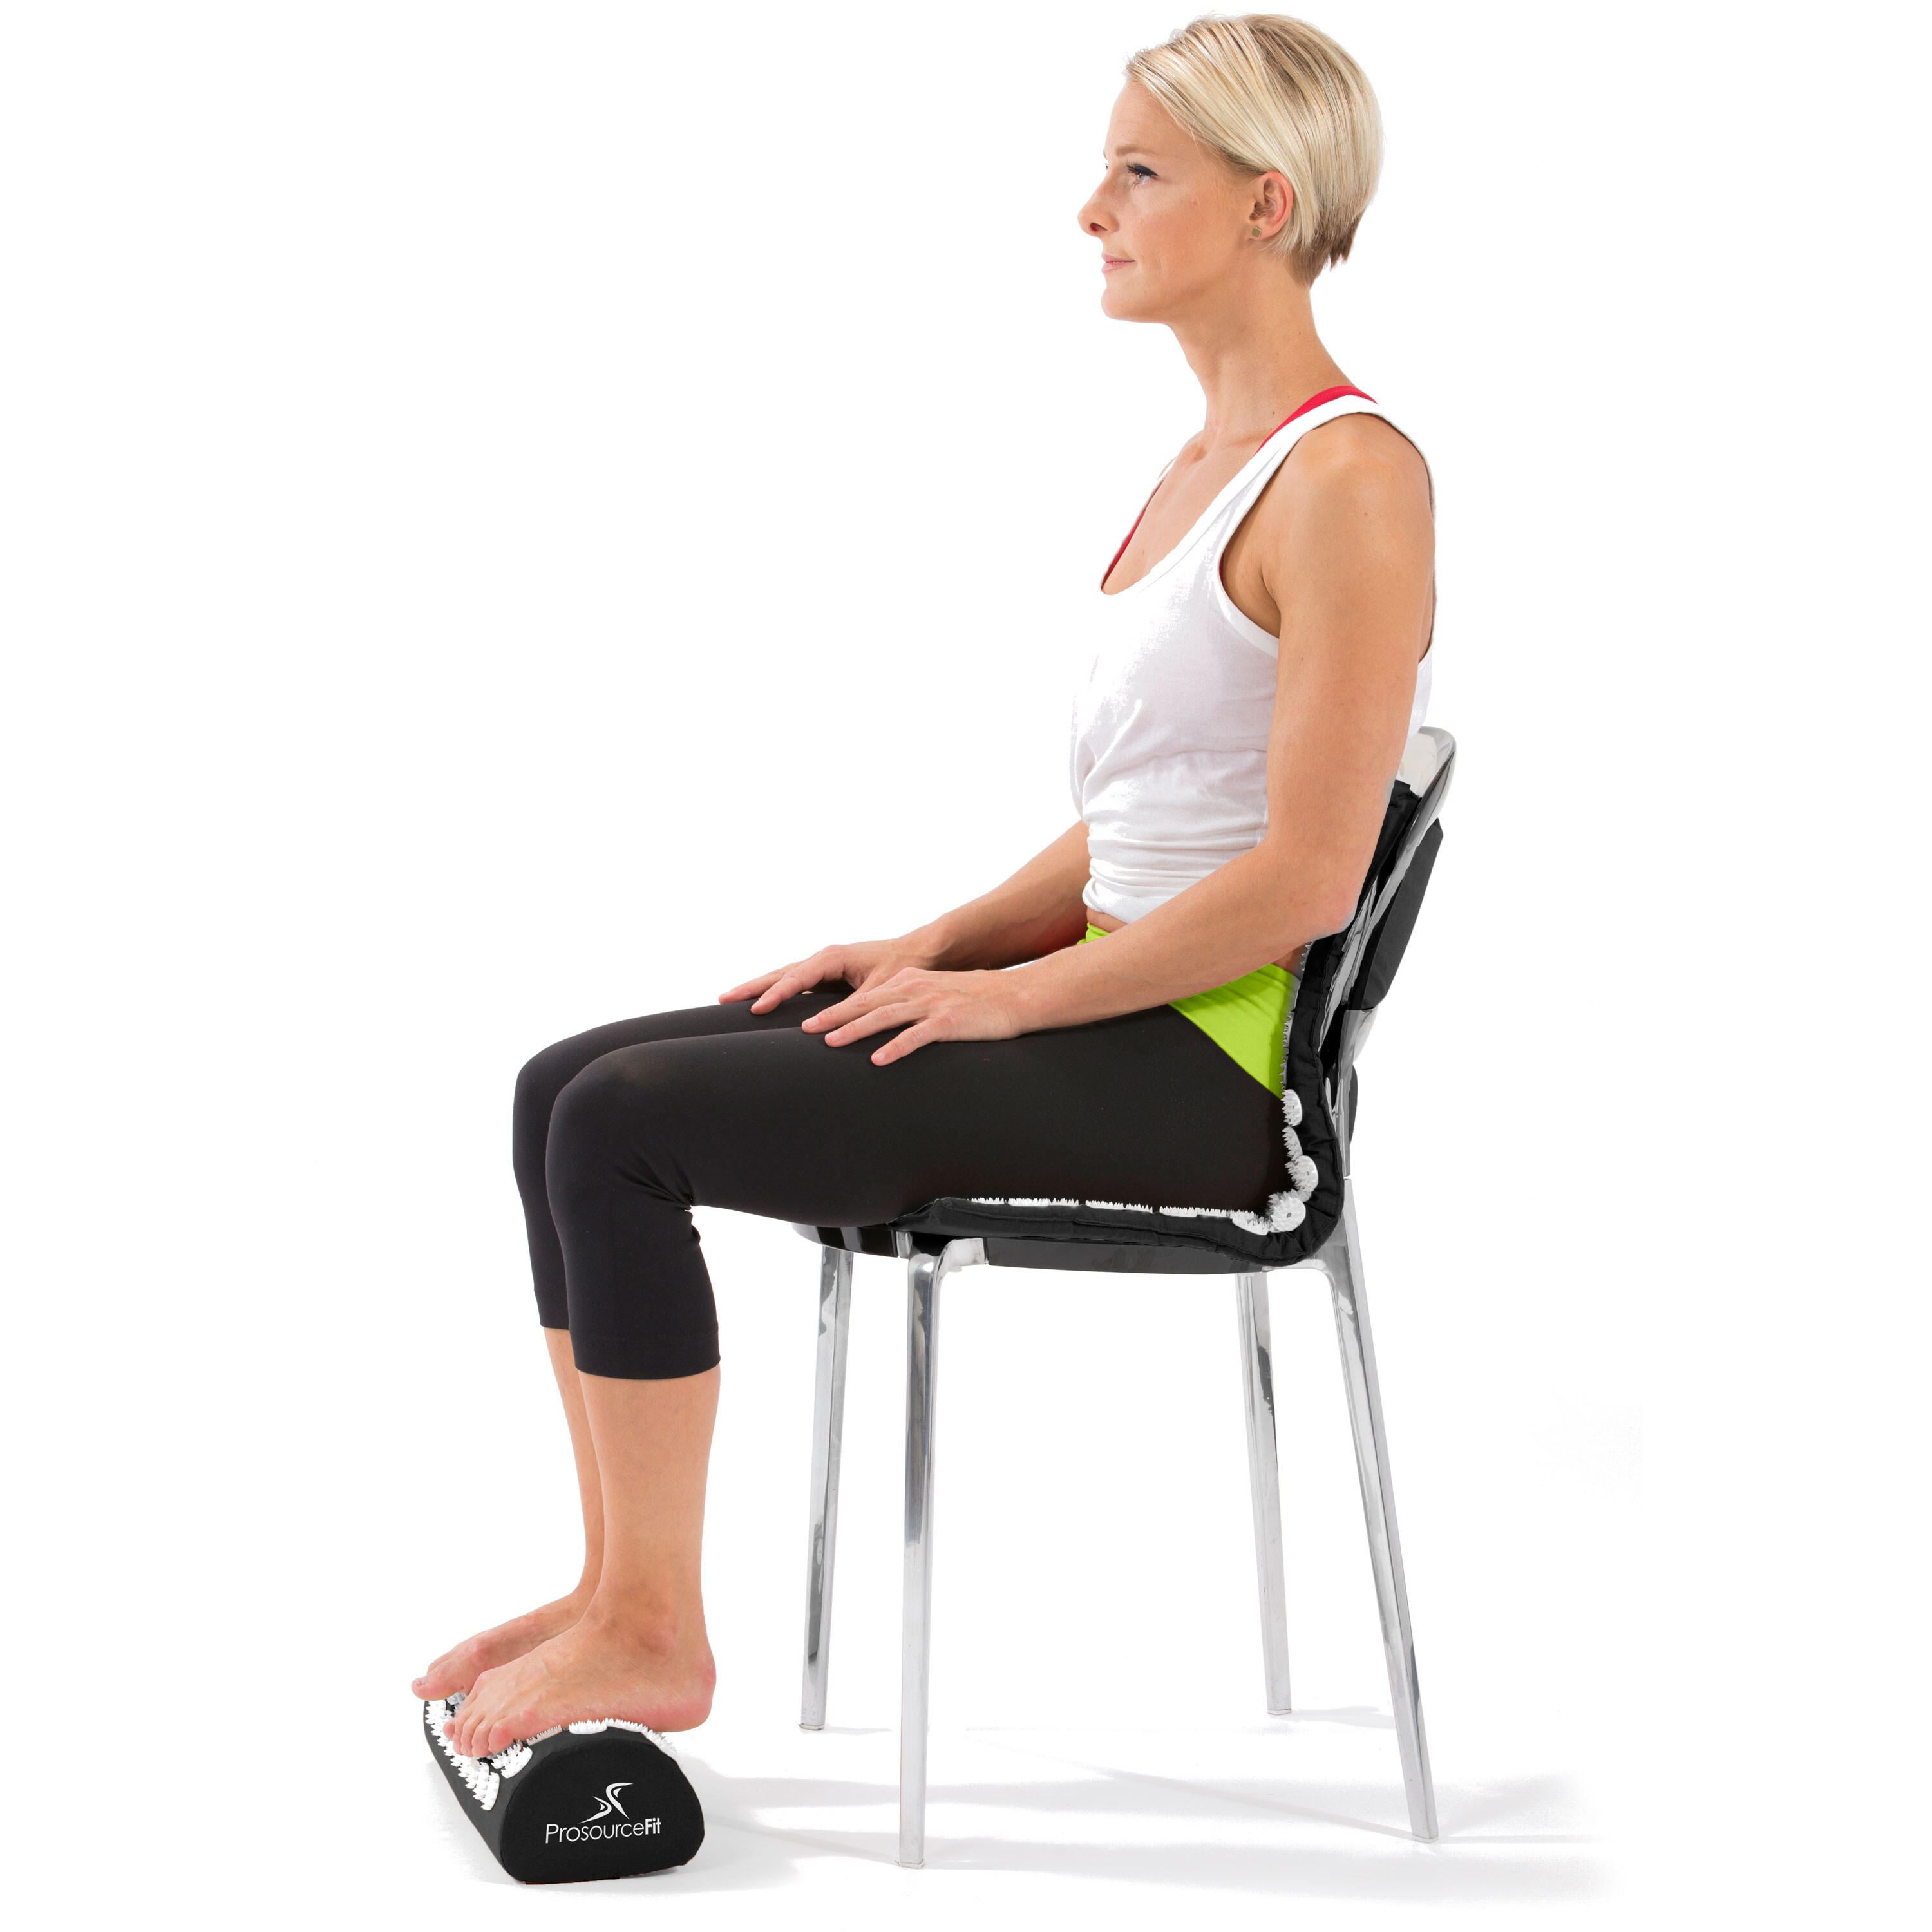 Backjoy Self-Massager – Foldable Trigger Point Relief – Posture Cushion